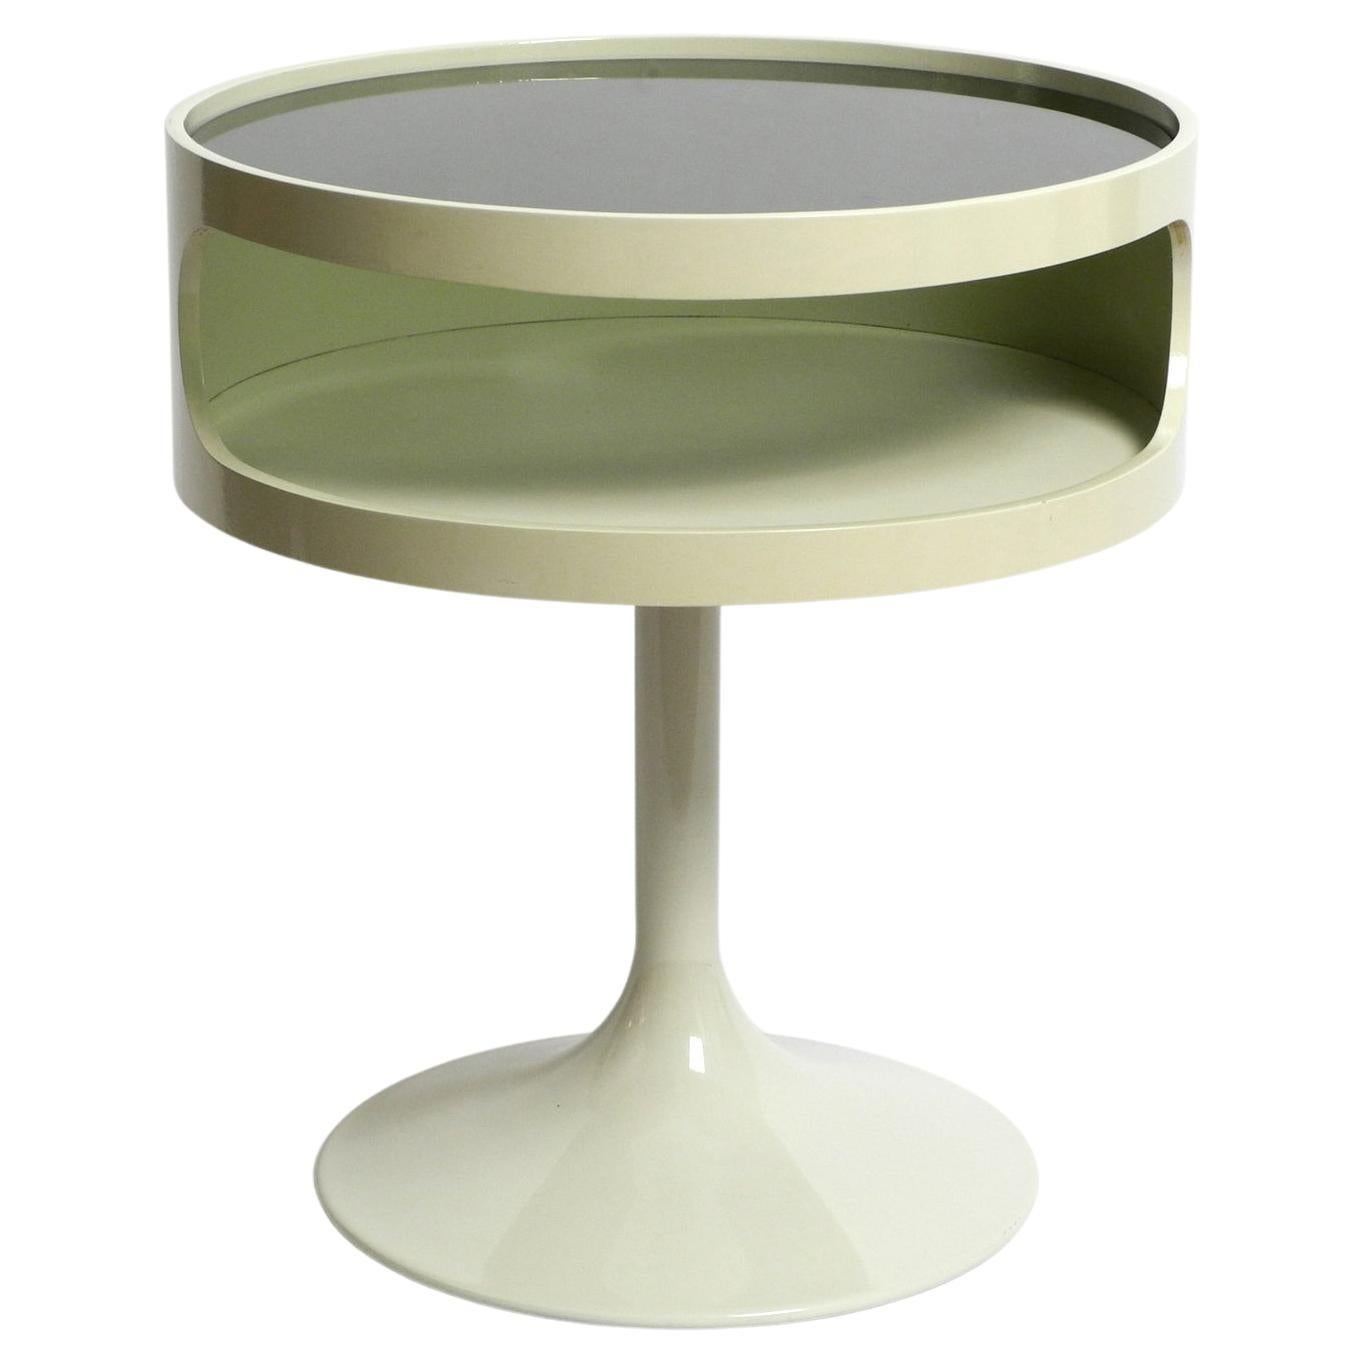 Rare 1970s Side Table in Space Age Design with Smoked Glass Top by OPAL Möbel